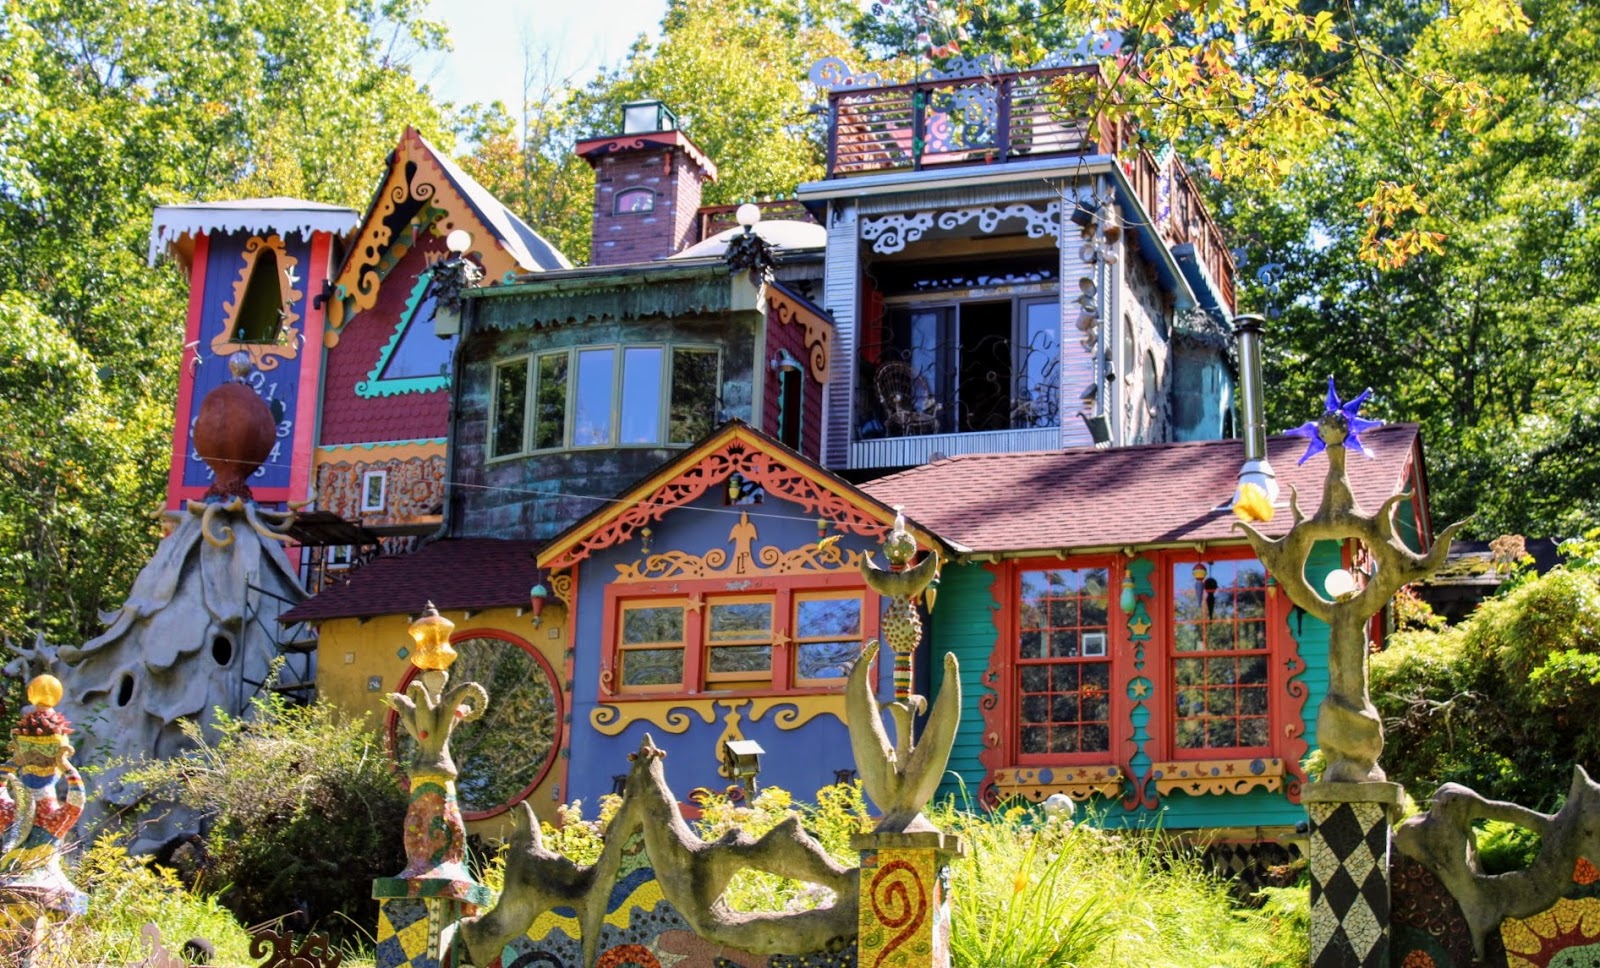 Lost in New Jersey: Luna Parc, Photographer's Paradise